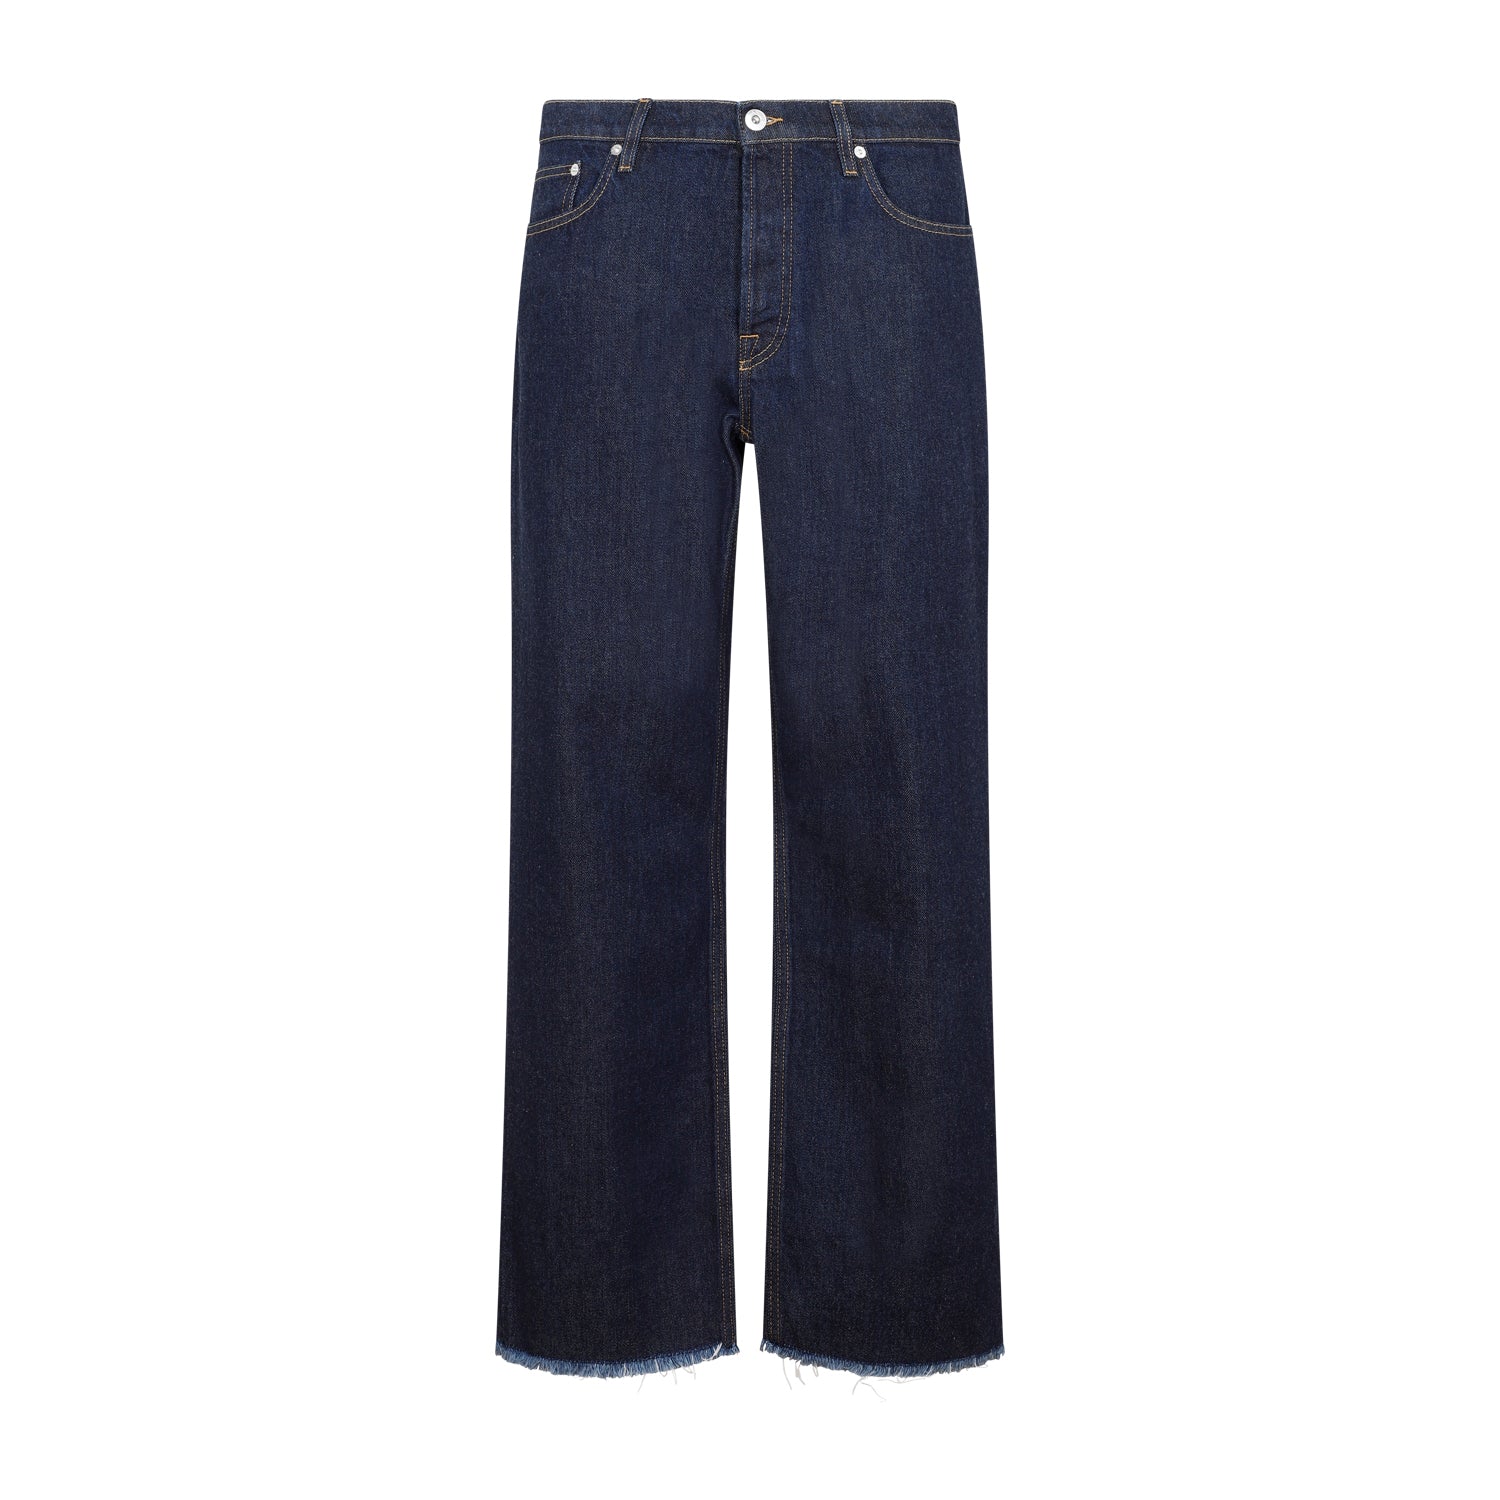 Lanvin Men's Blue Denim Jeans With Contrast Stitching And Frayed Hems